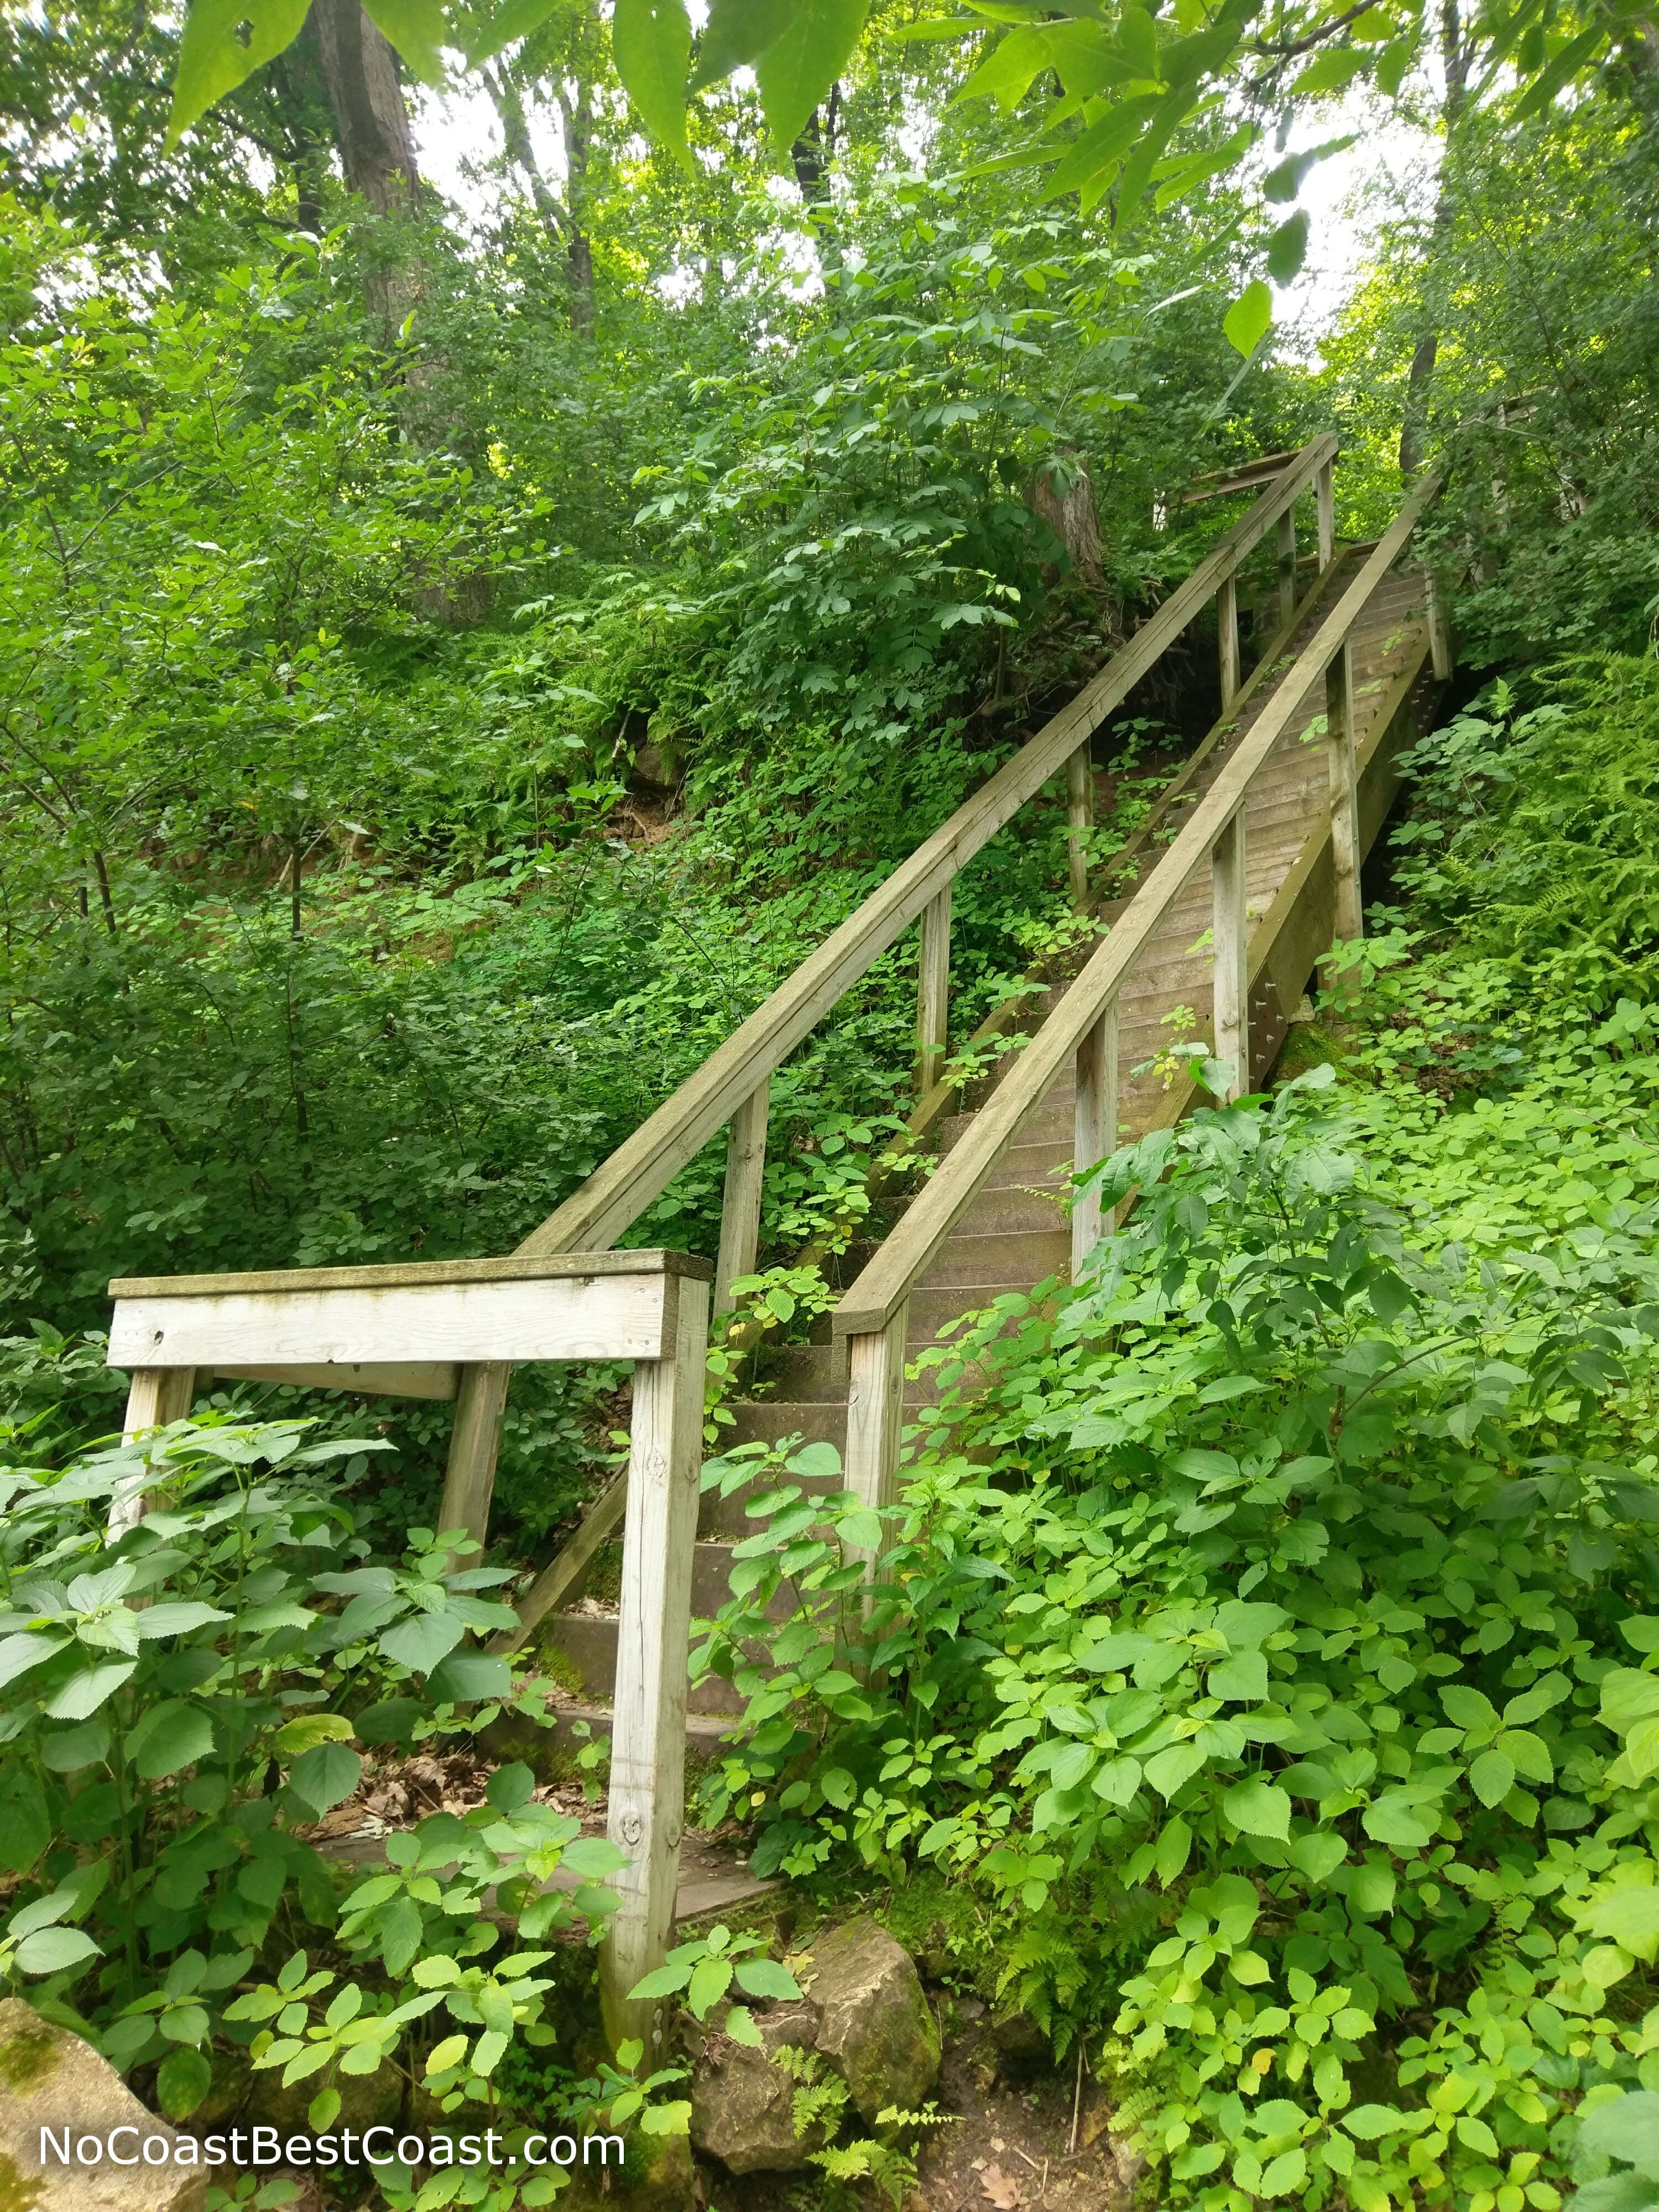 The steep stairs down to the Mississippi River